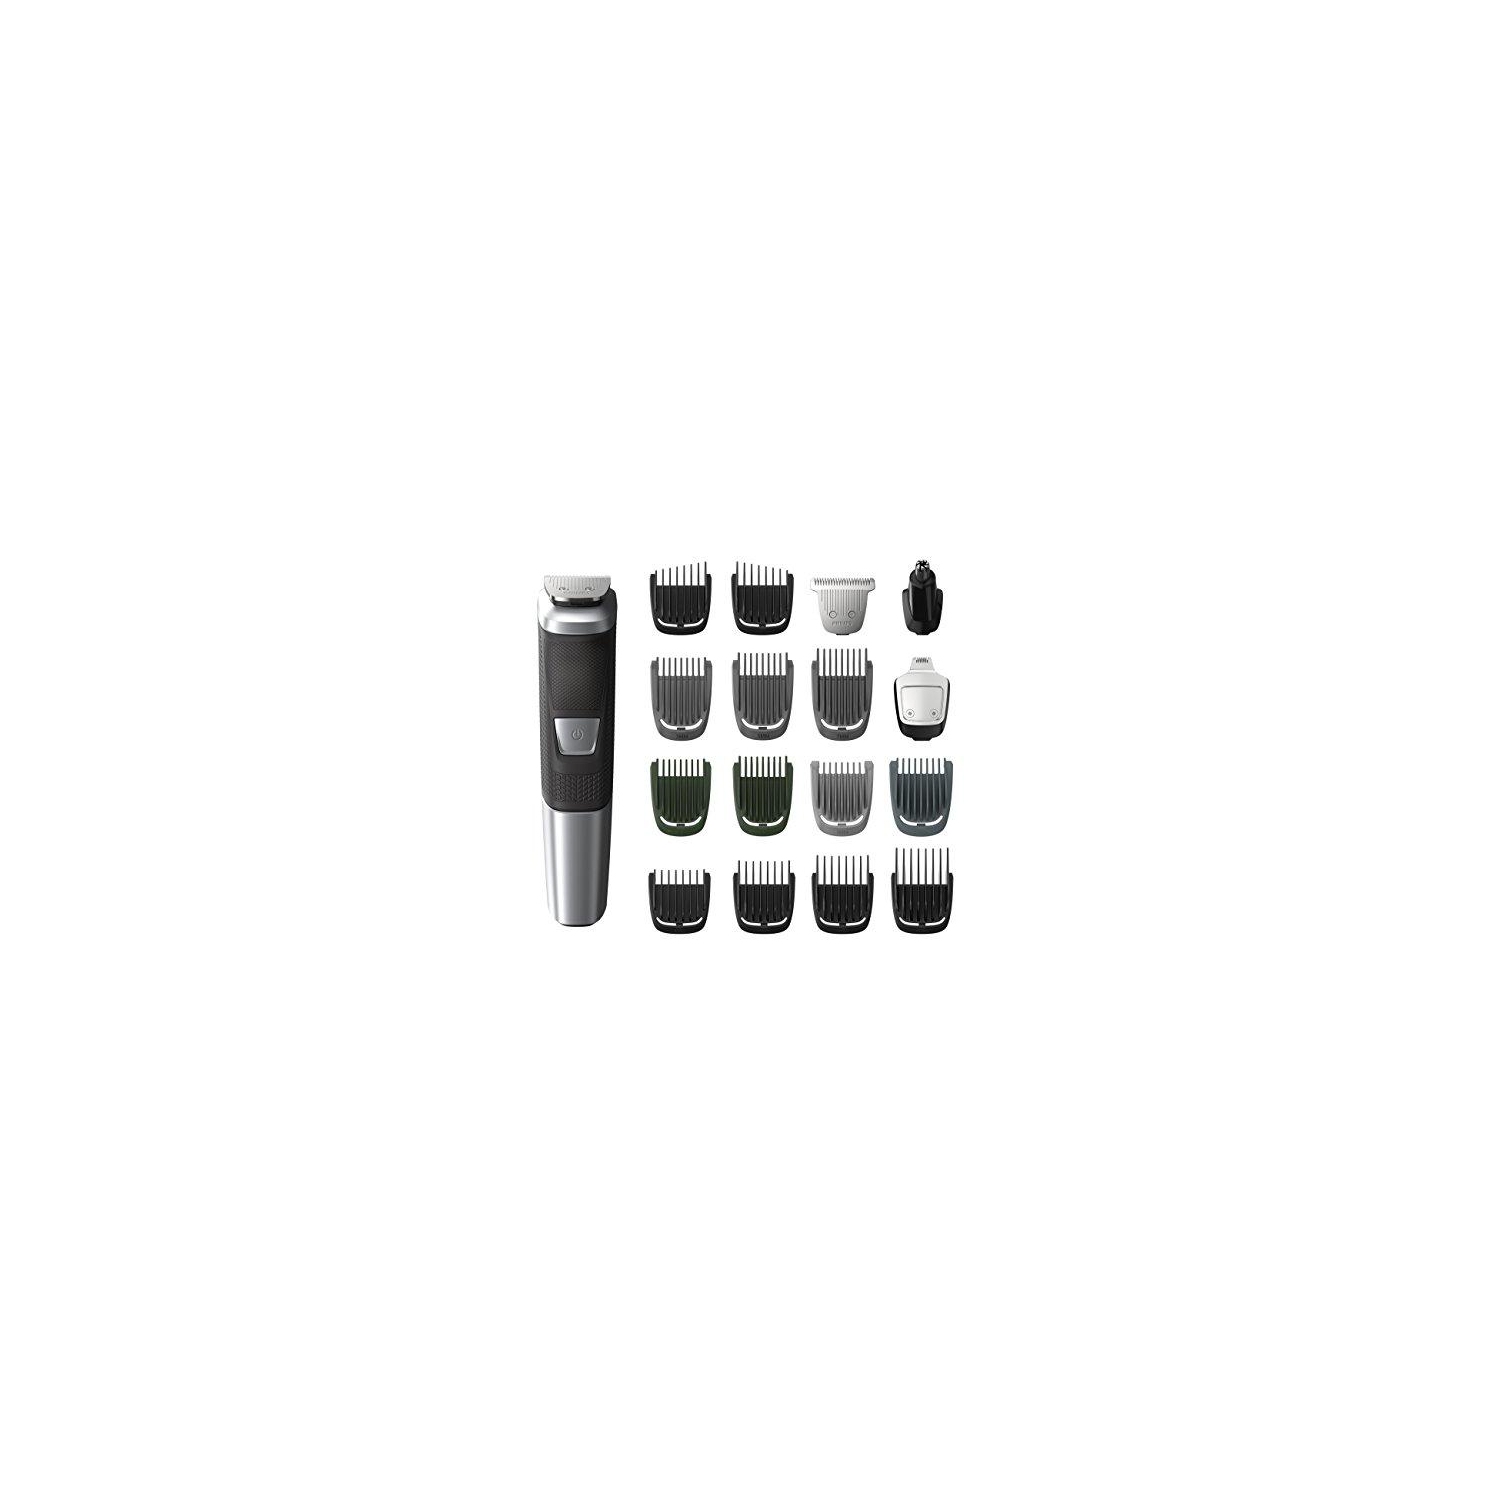 Philips Norelco Multi Groomer MG5750/49-18 piece, beard, body, face, nose, and ear hair trimmer and clipper